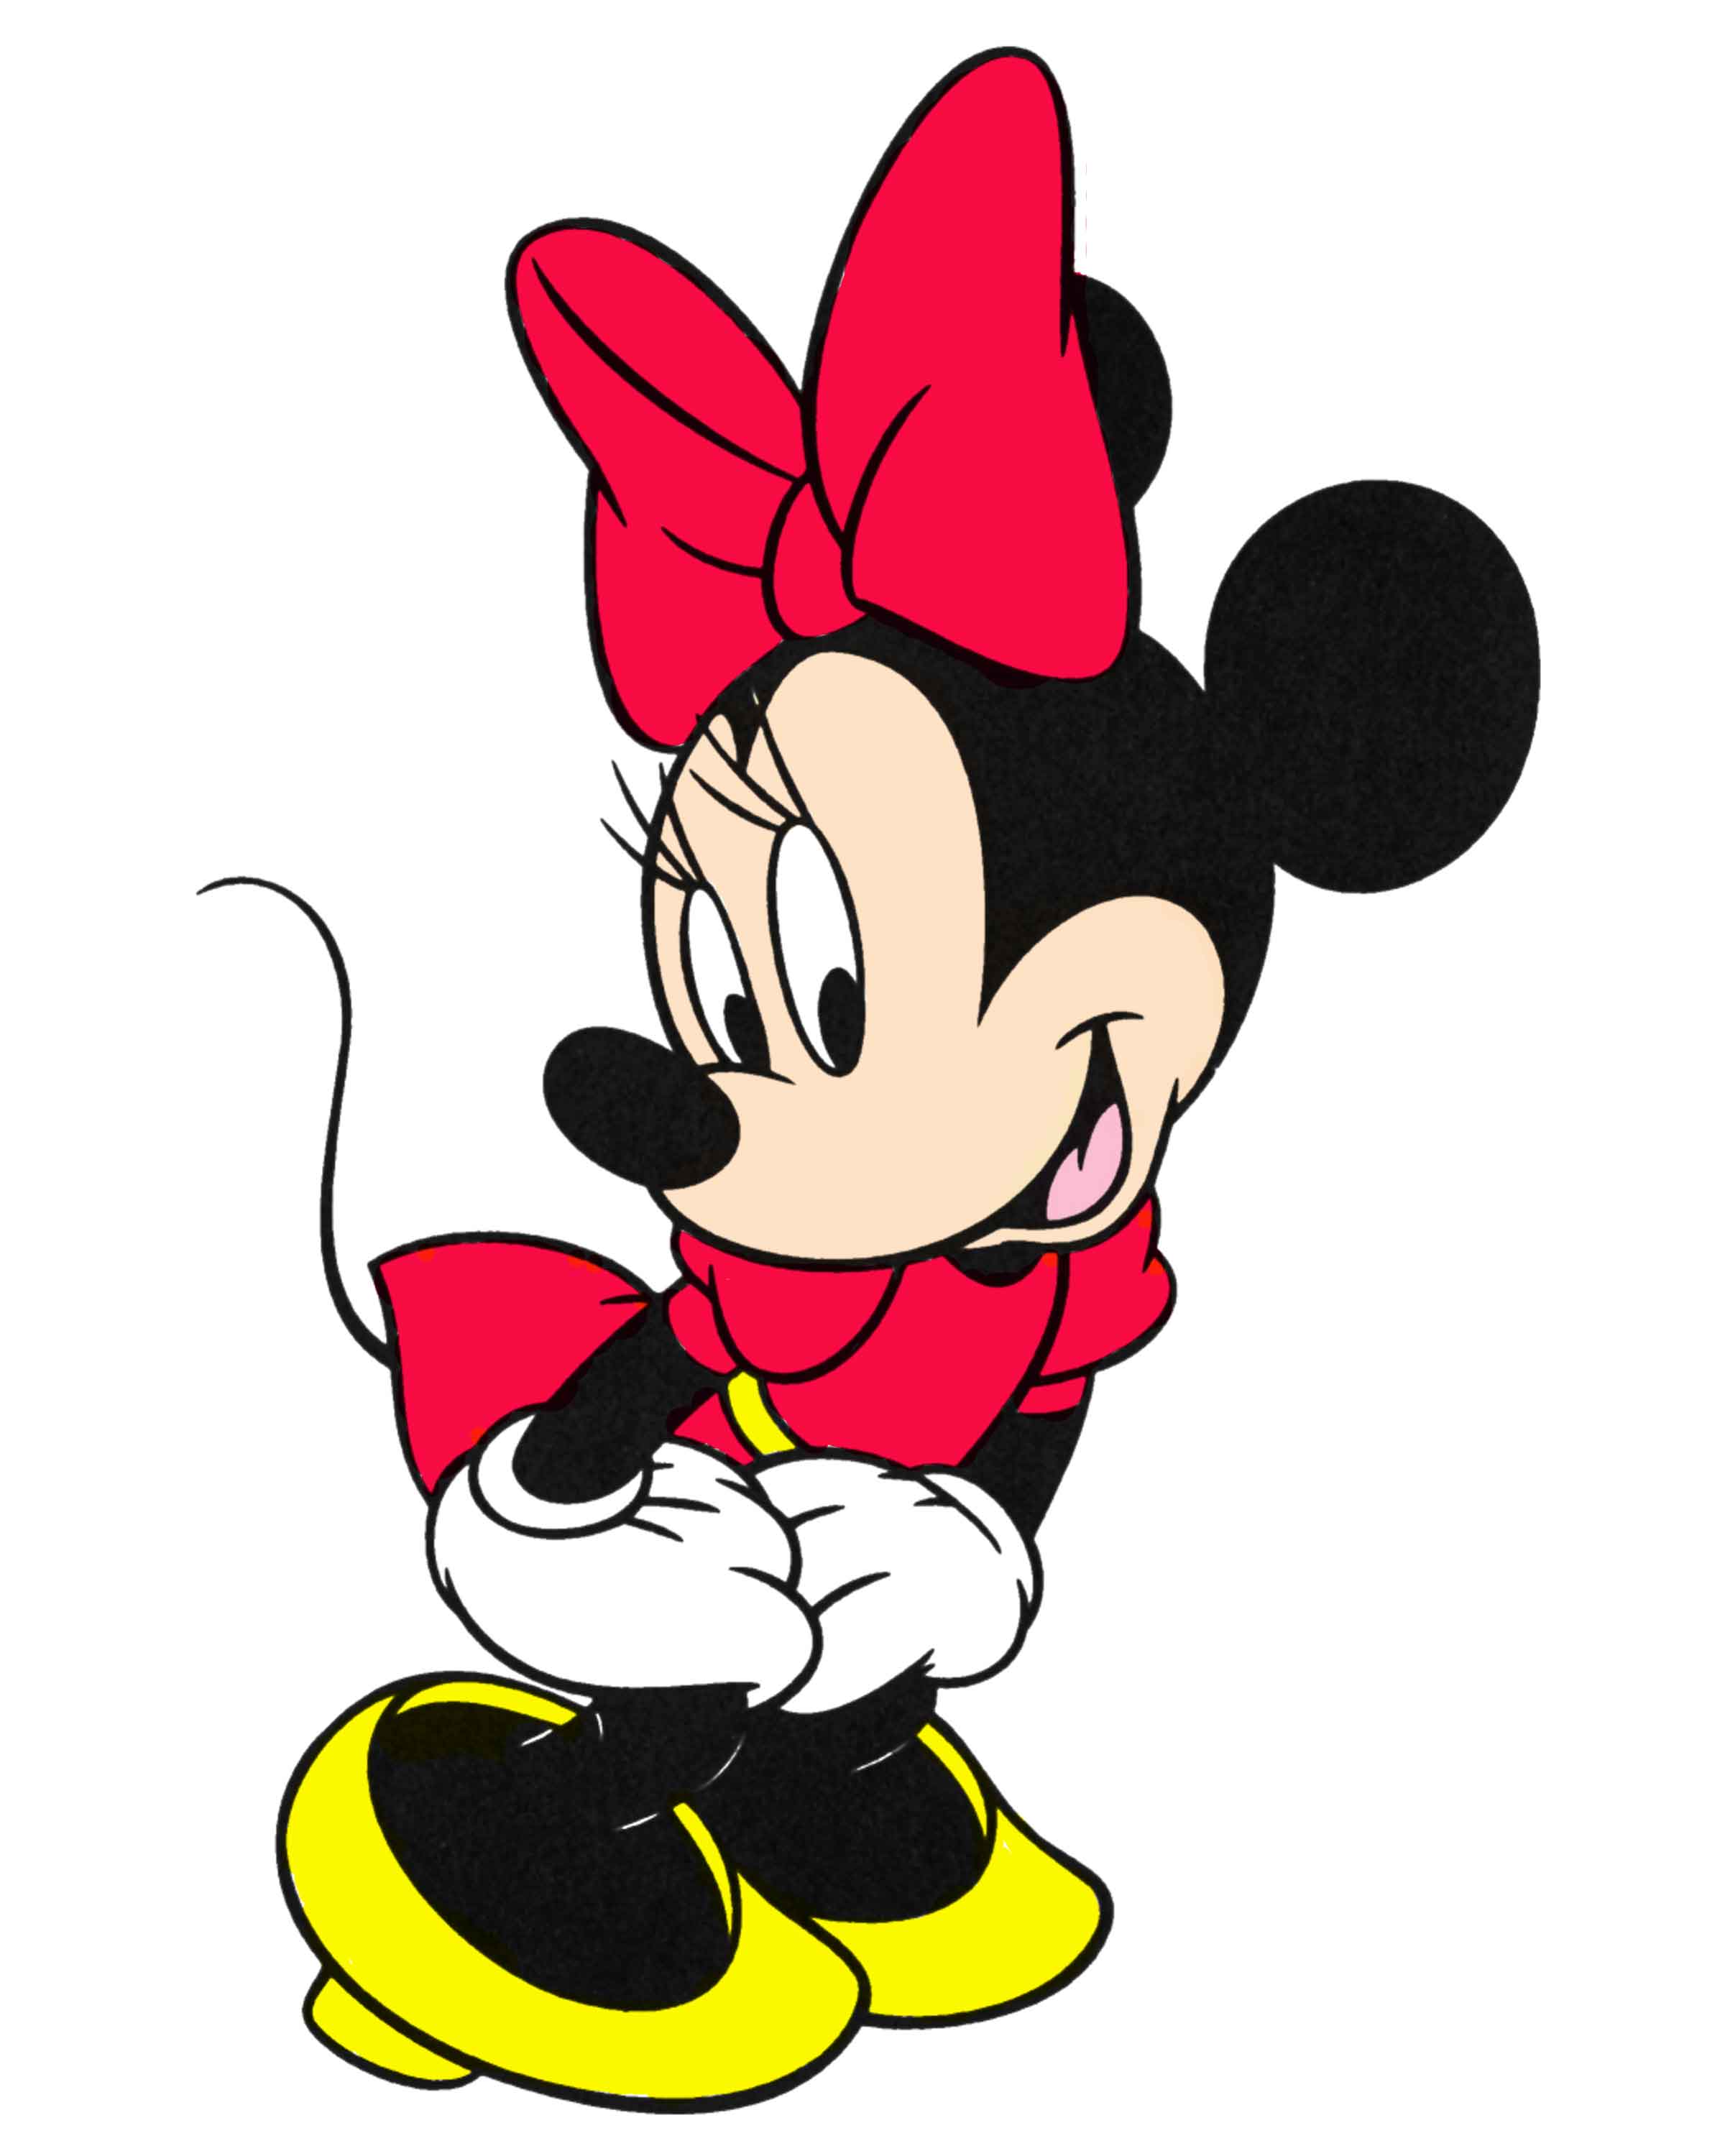 1000+ images about Minnie mouse